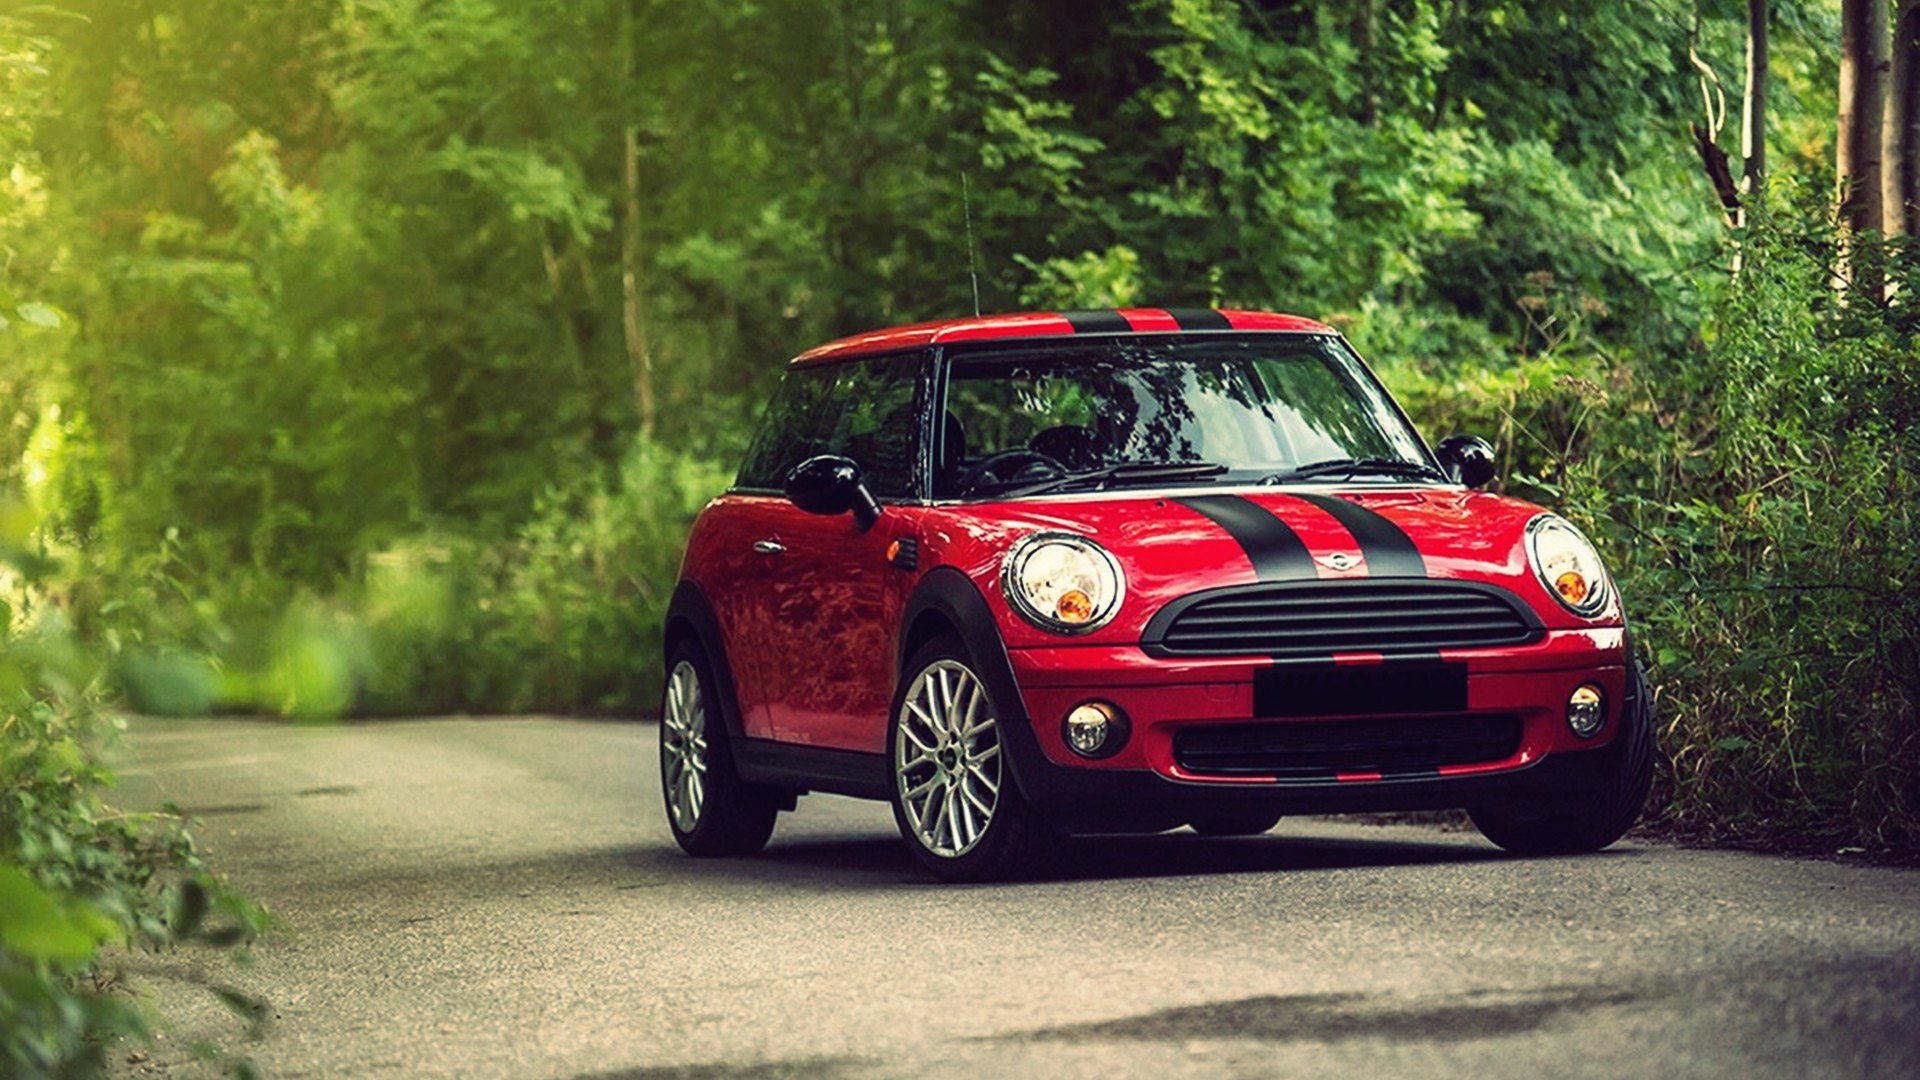  Mini Cooper HD Wallpapers Backgrounds